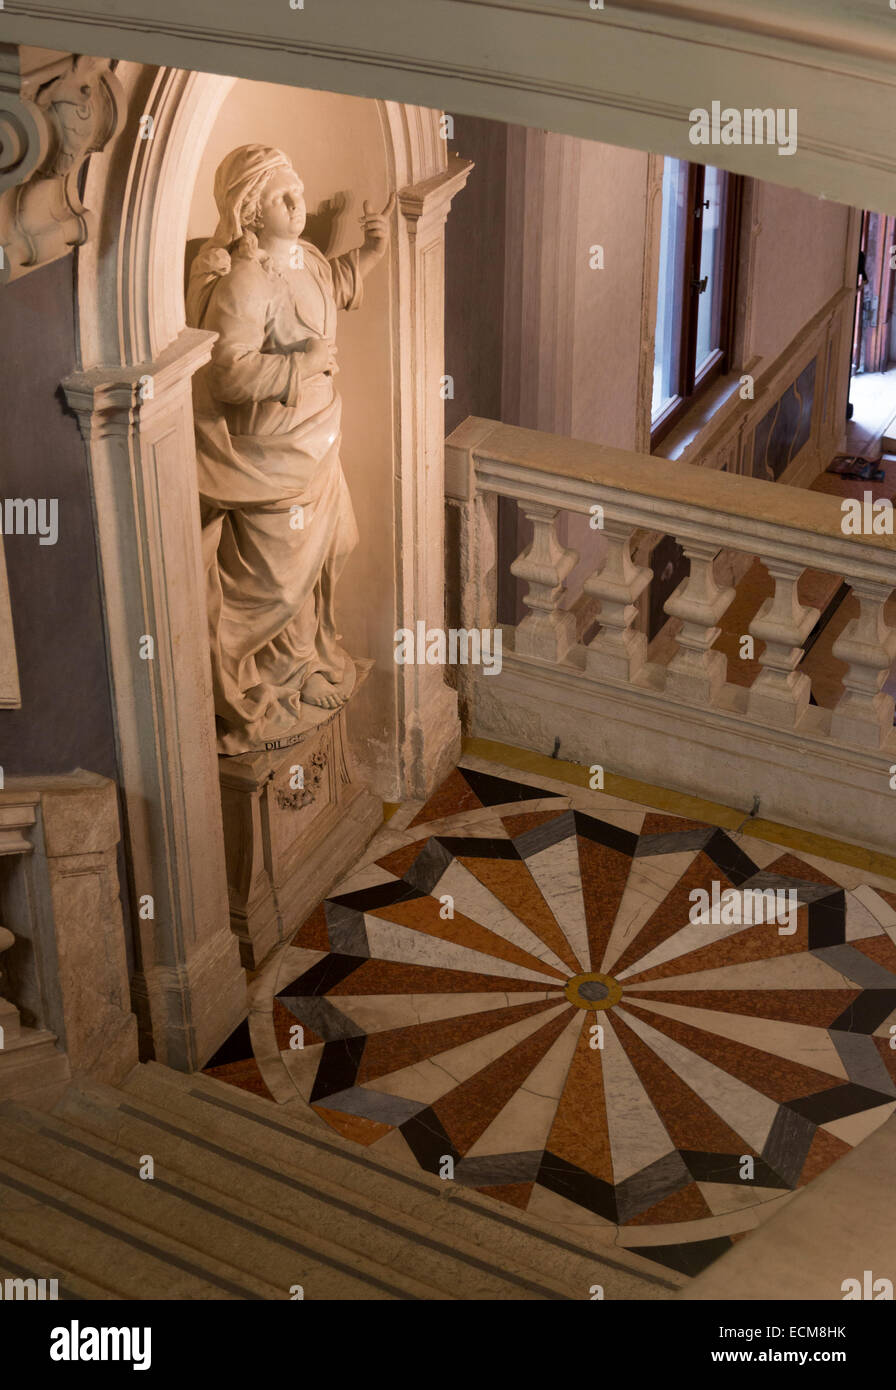 staircase with inlaid marble paving and statue, Gallerie dell'Accademia, Venice, Italy Stock Photo